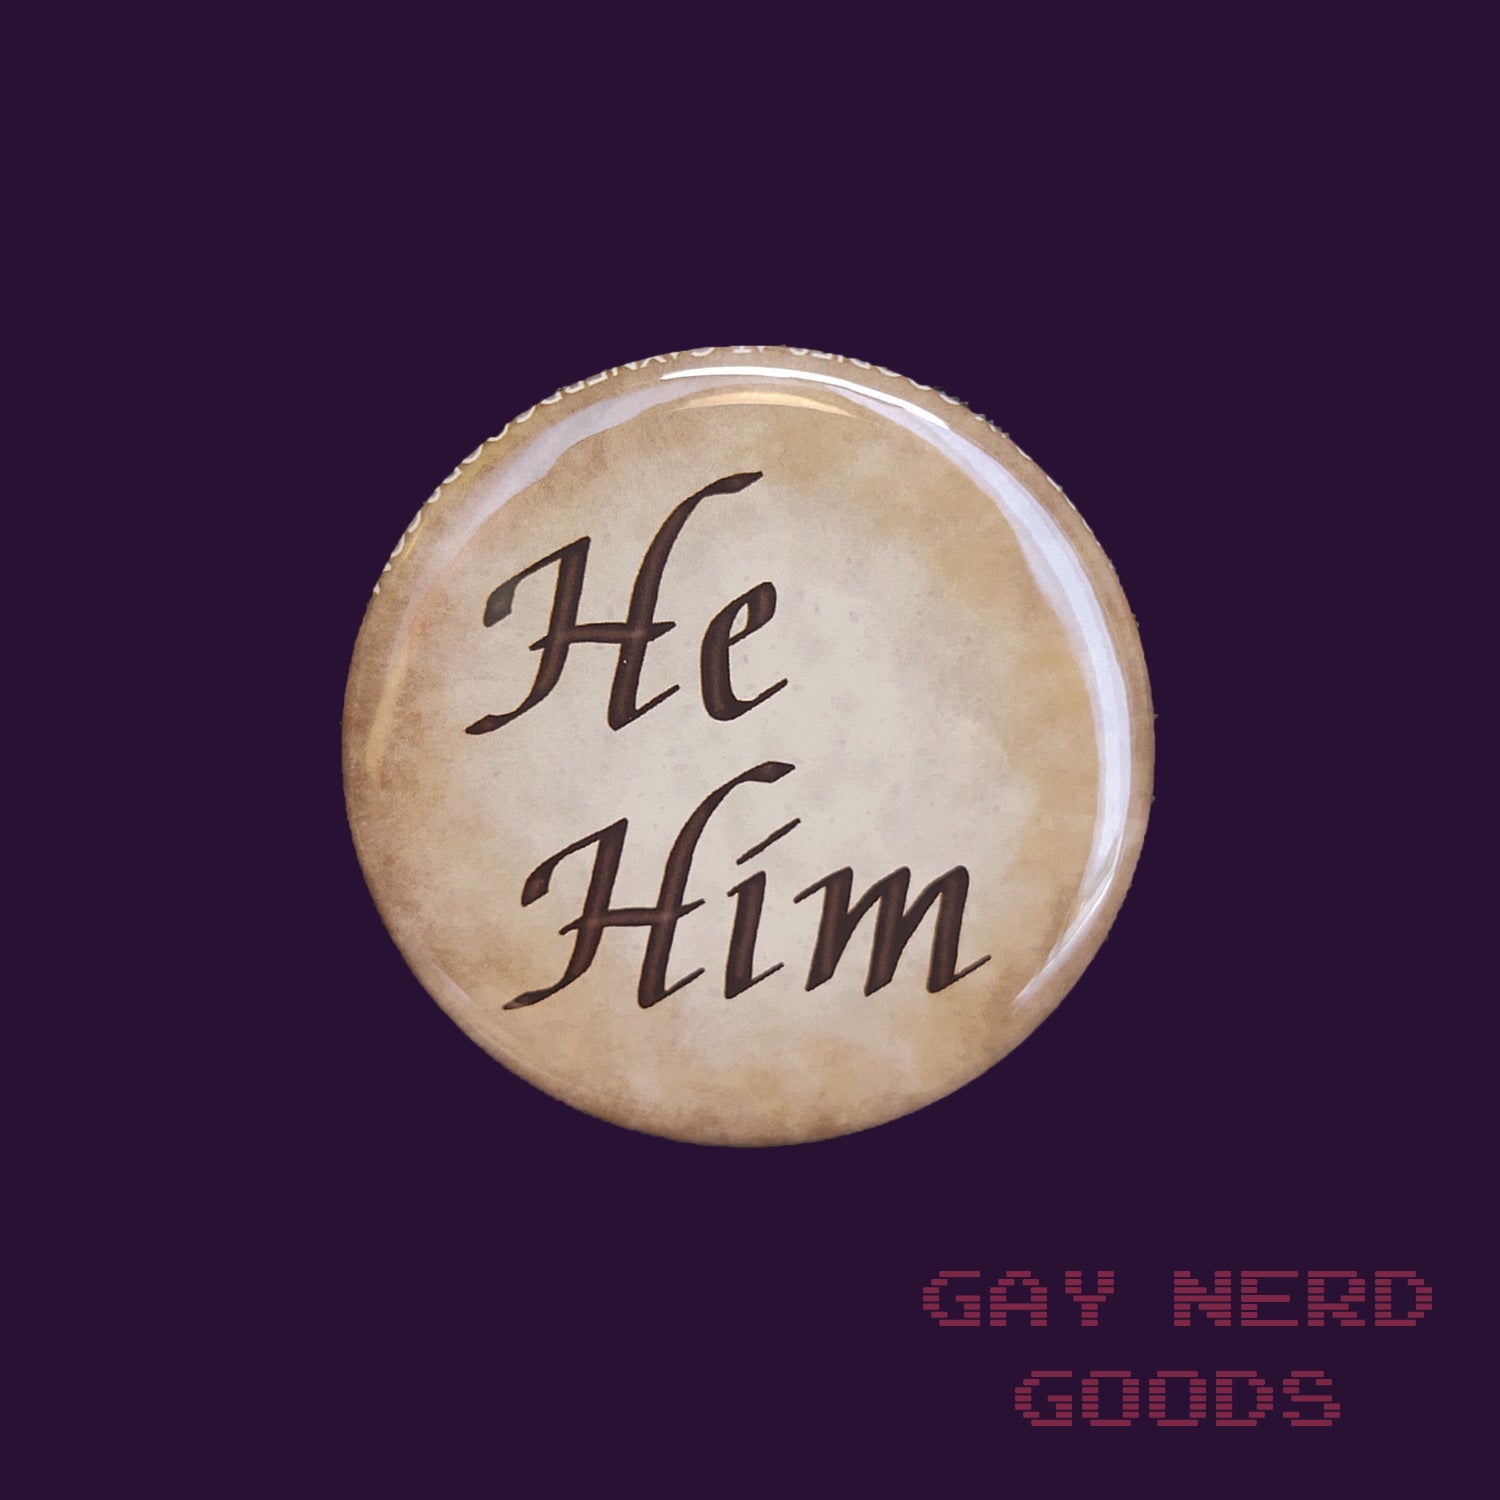 he him large calligraphy pronoun button on a dark purple background